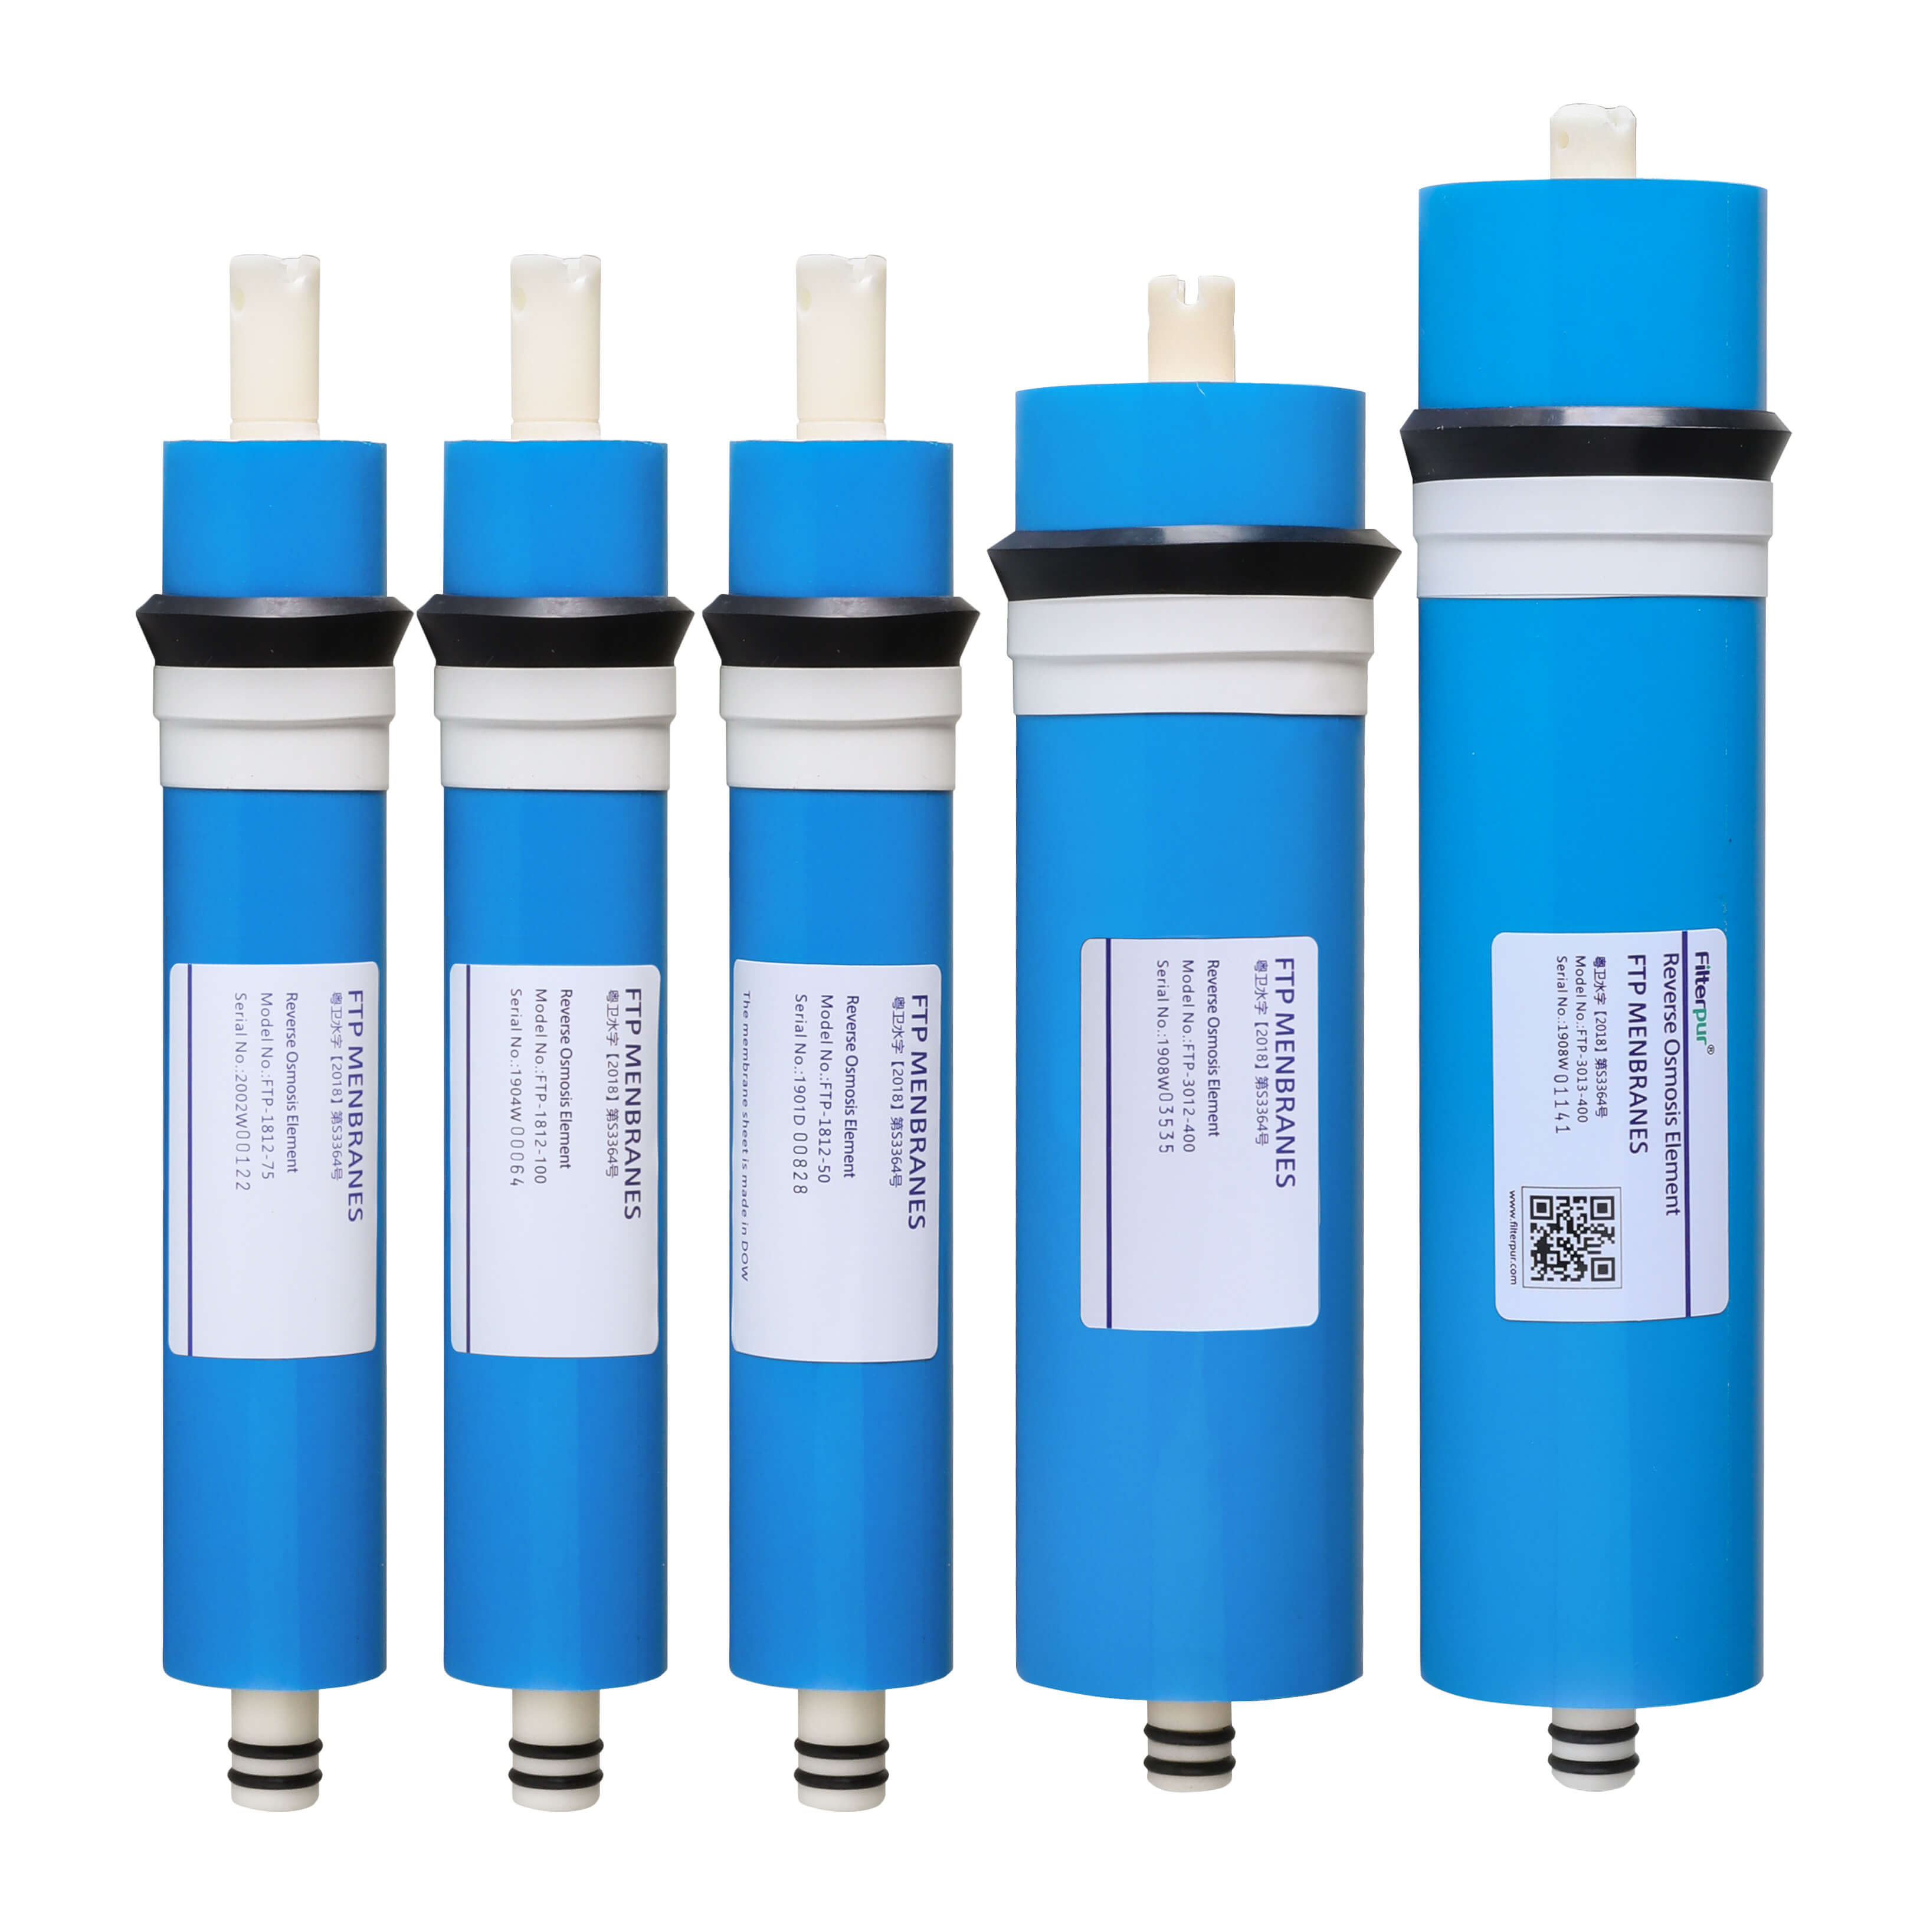 What is the principle of ro membrane reverse osmosis water purifier?